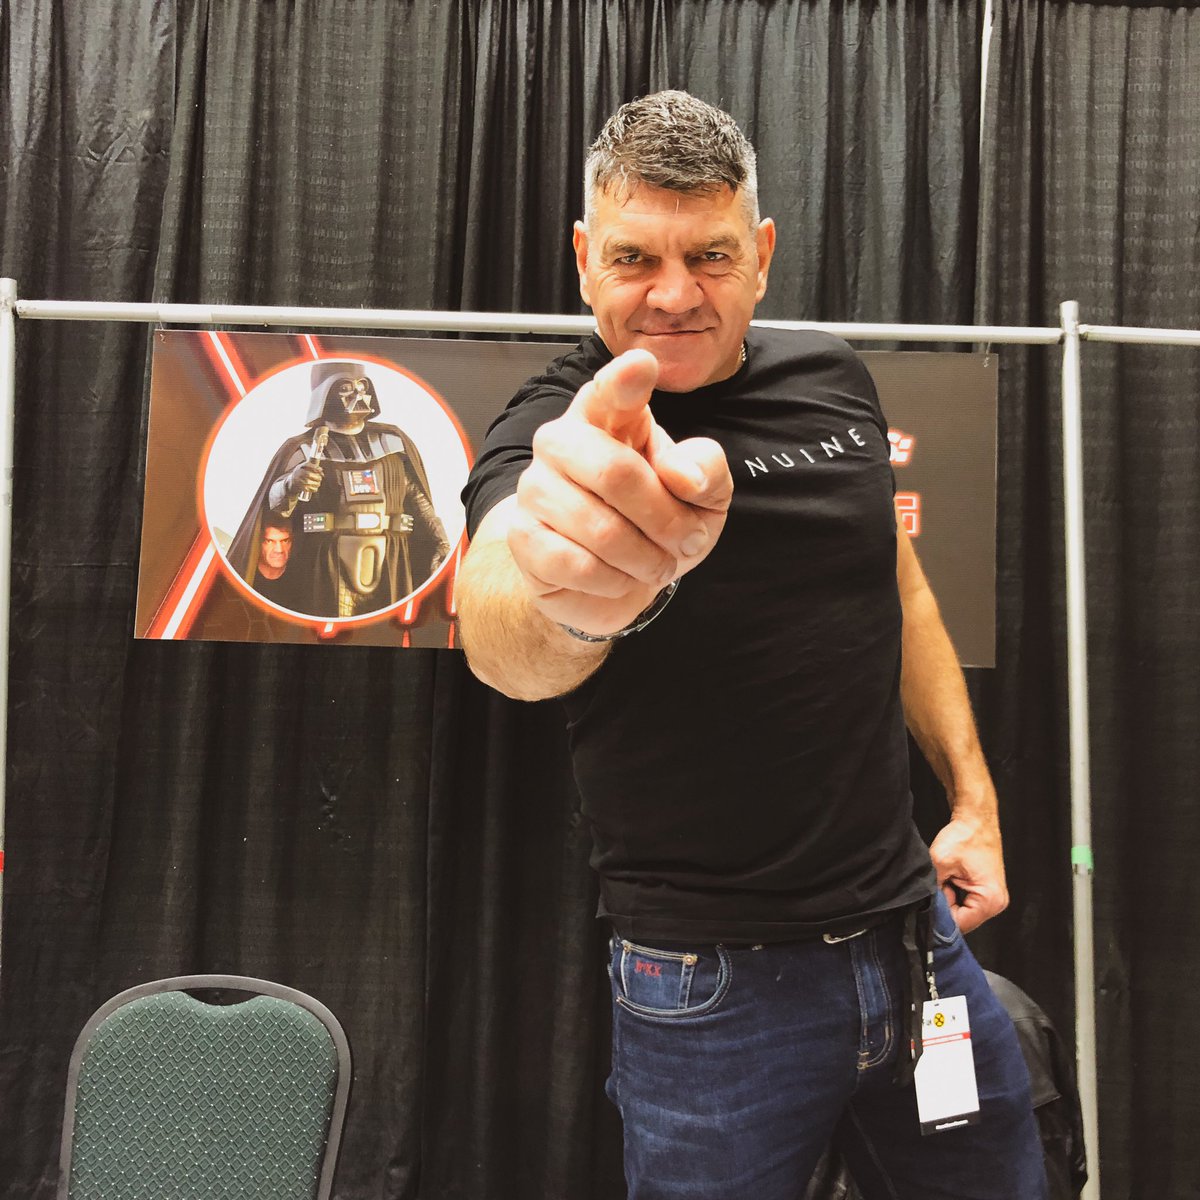 Vader might choke you, but we assure you Spencer Wilding won’t! Come meet the body behind Luke’s father this weekend at #FanCon10 #NorthernFanCon #DecadeOfFanCon #CityOfPG #TakeOnPG #StarWars